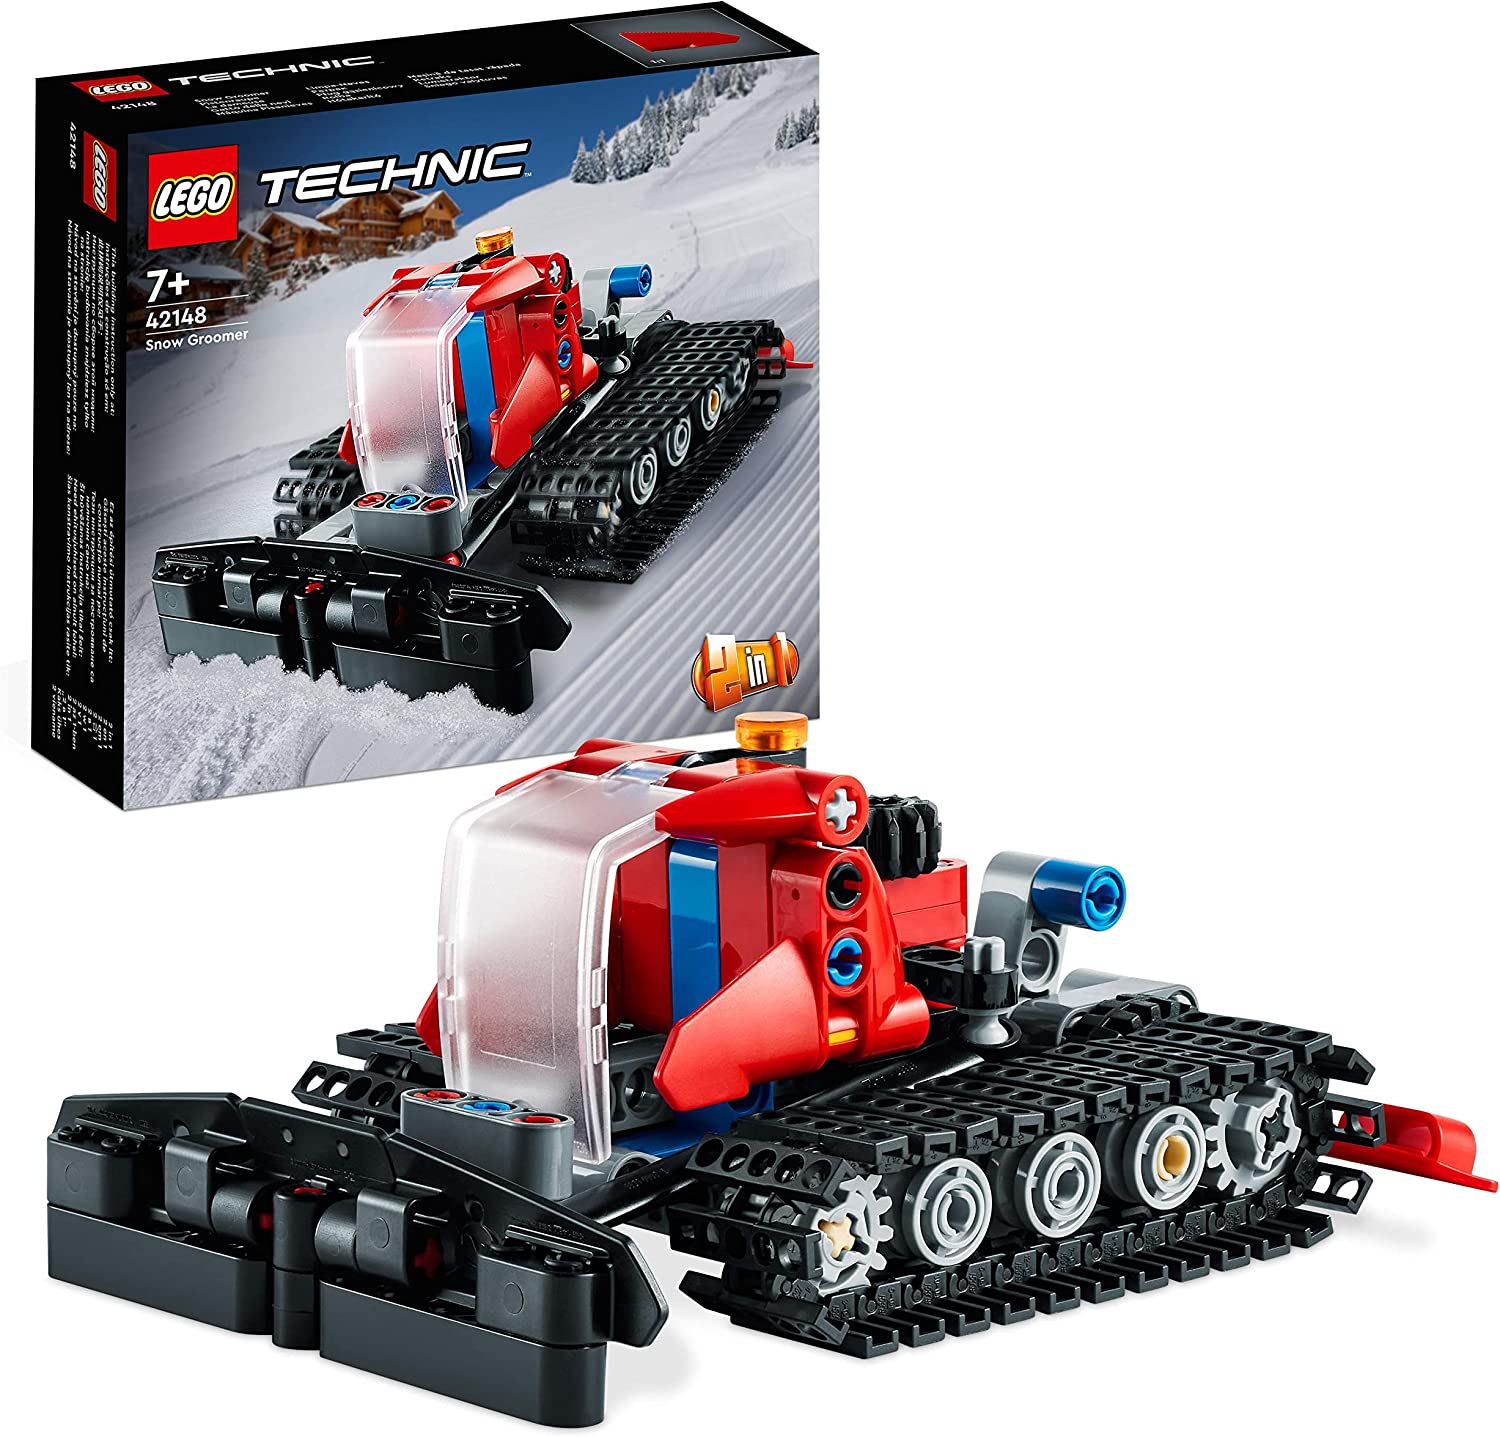 LEGO 42148 Technic Pistenraupe, 2-in-1 Winter Vehicle Model Toy with Snowmobile, Technology Educational Toy for Boys and Girls from 7 Years, Birthday Gift